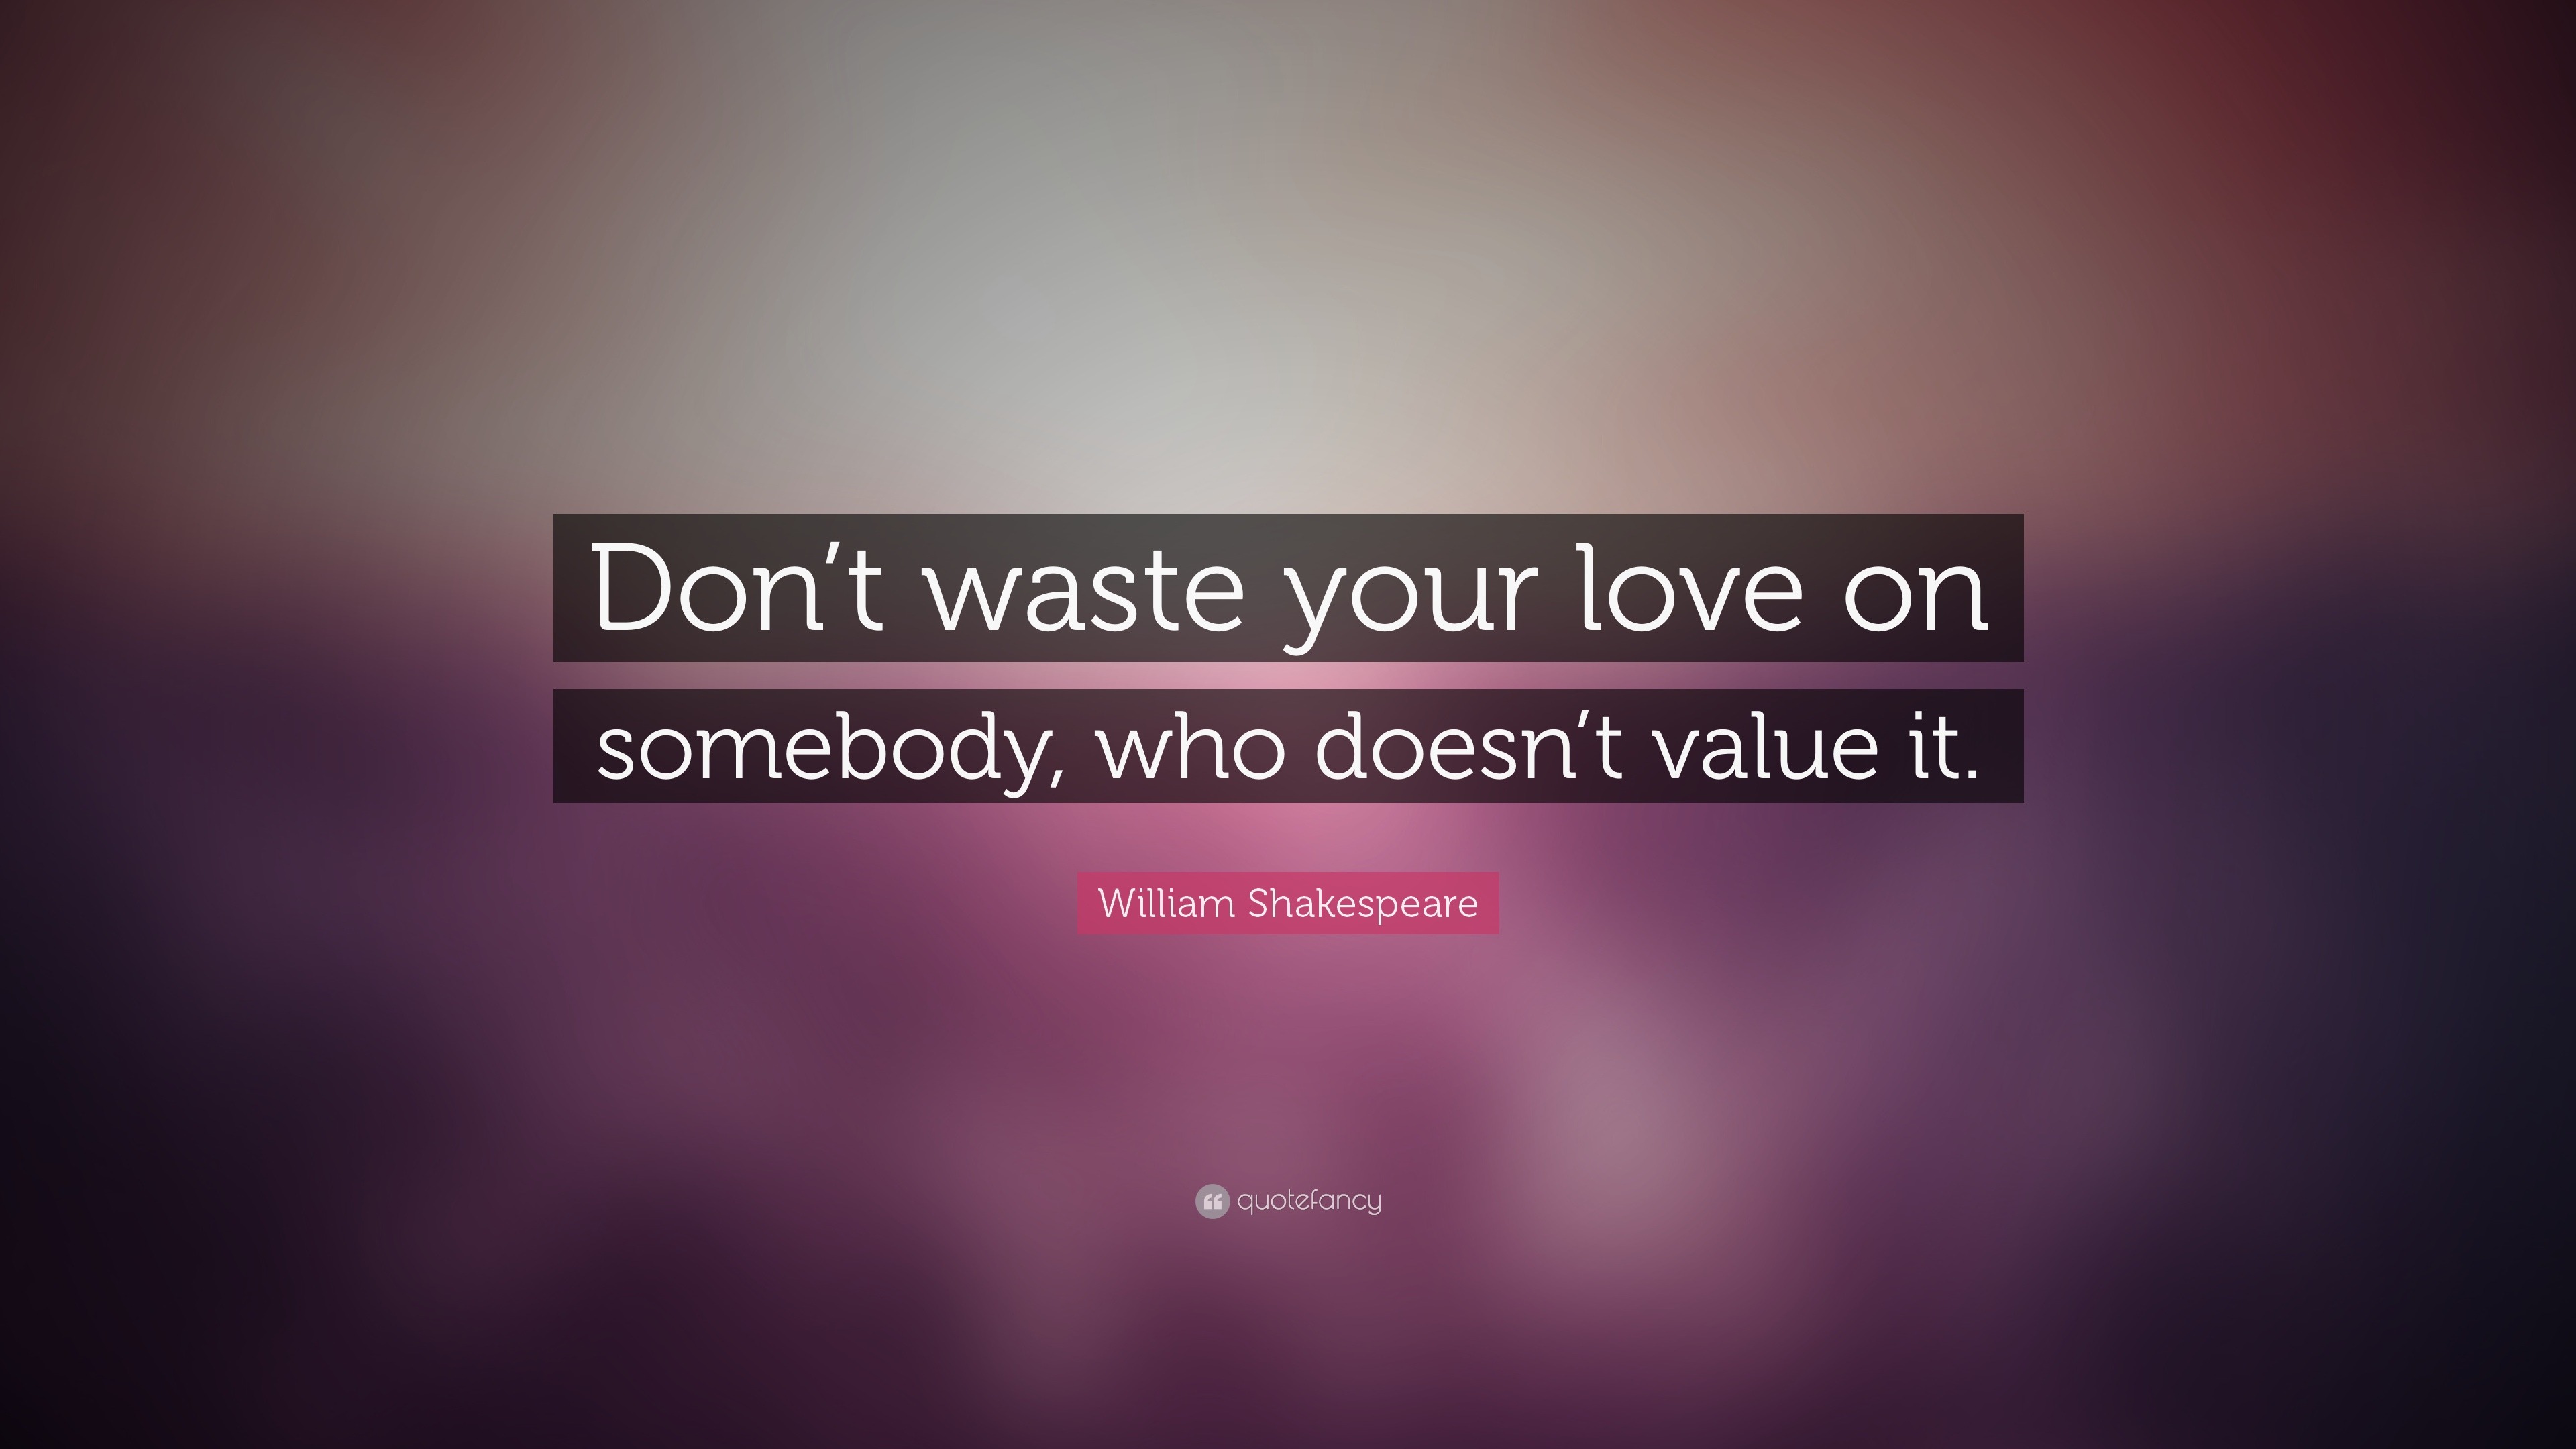 6141 William Shakespeare Quote Don t waste your love on somebody who